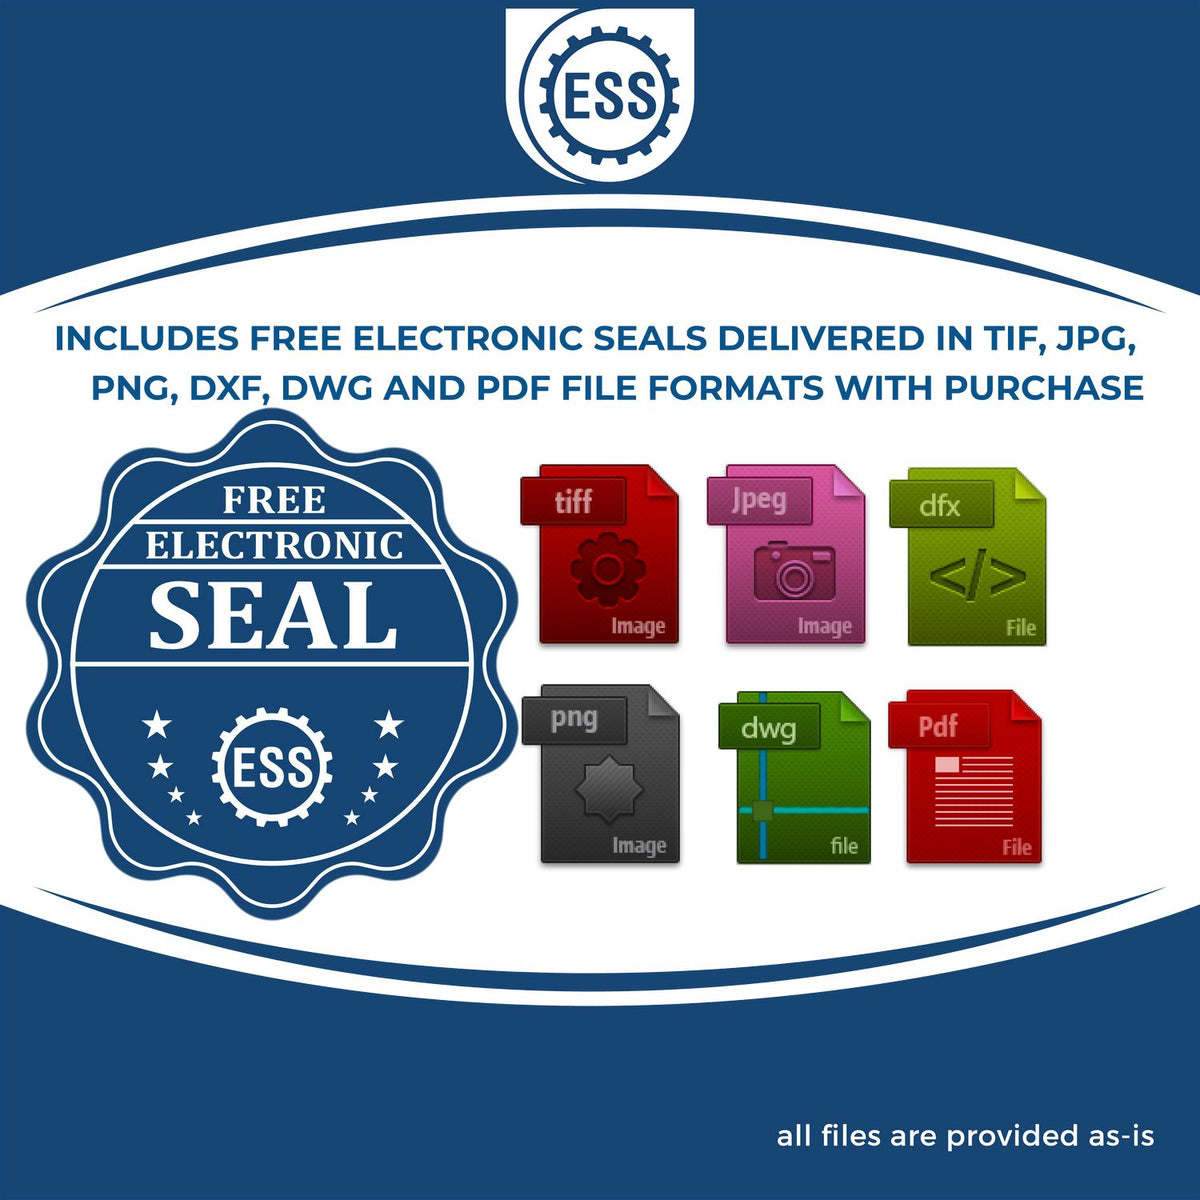 An infographic for the free electronic seal for the Slim Pre-Inked Oklahoma Land Surveyor Seal Stamp illustrating the different file type icons such as DXF, DWG, TIF, JPG and PNG.